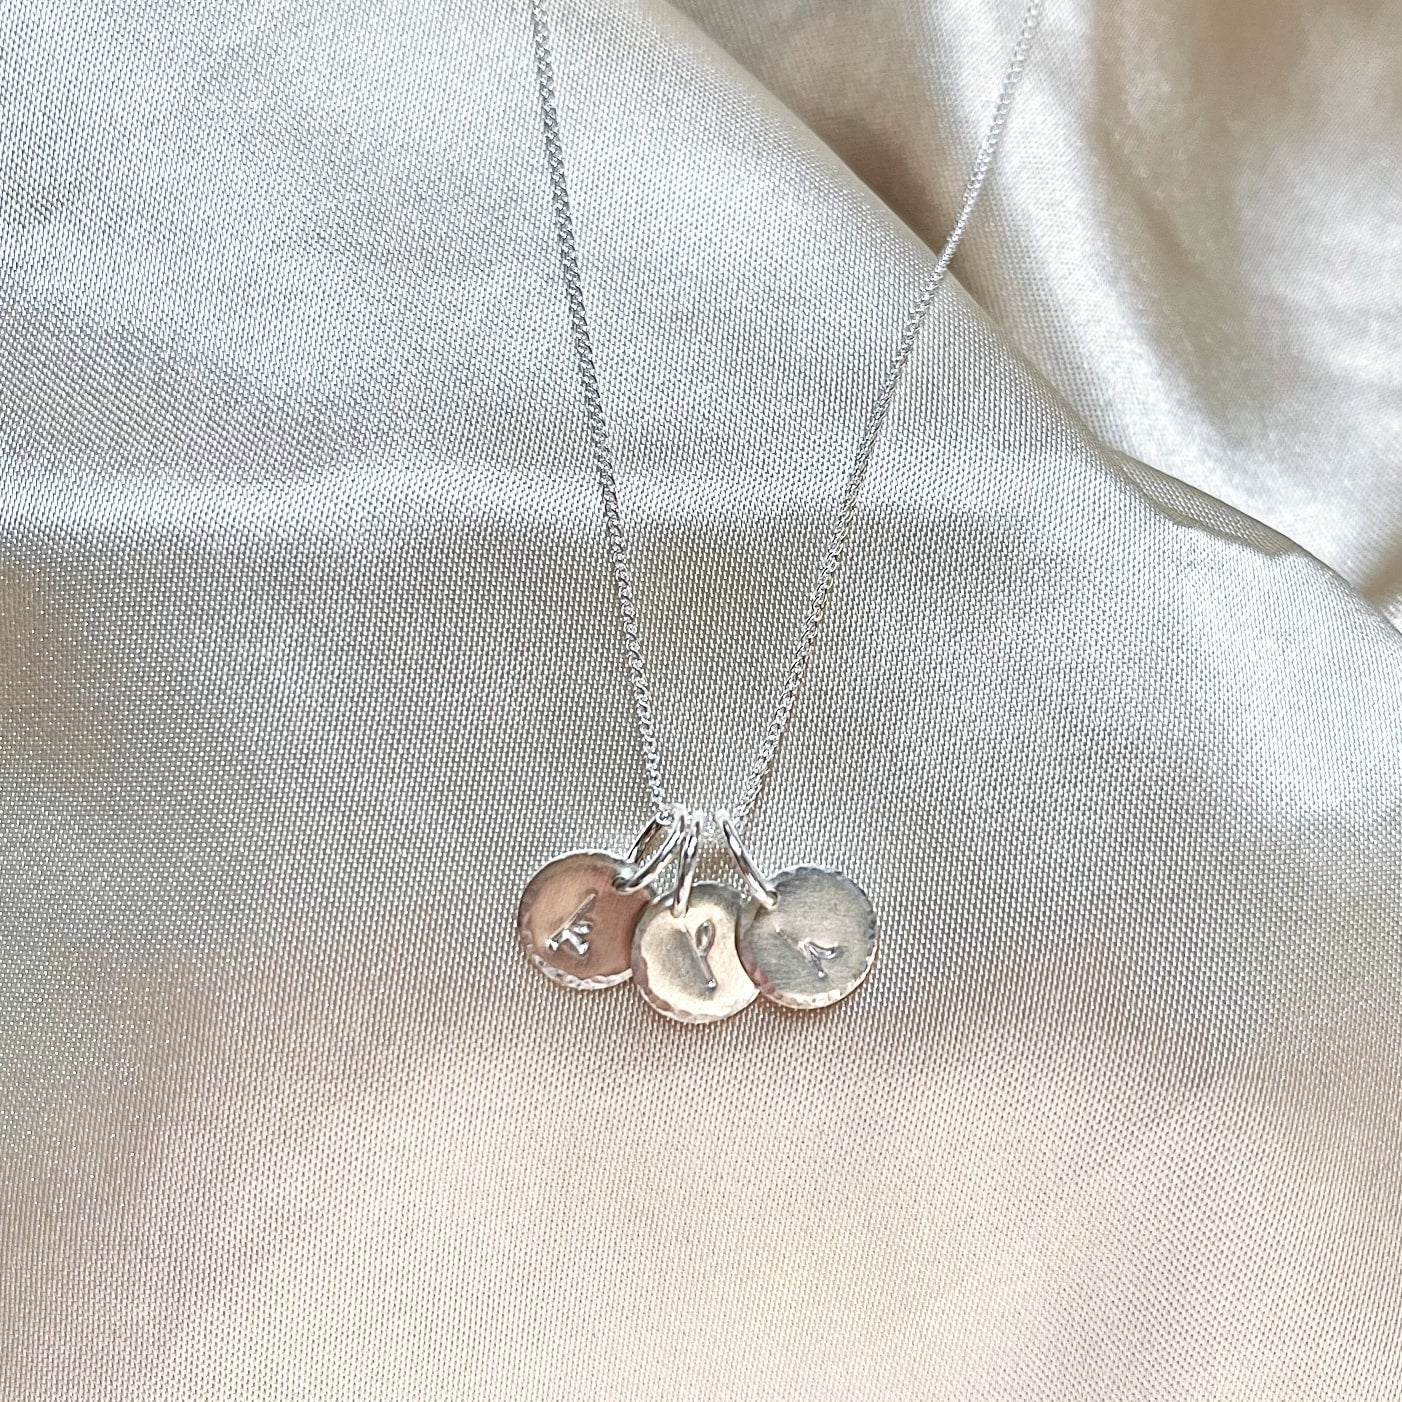 Etched Custom MINI Disc Necklace